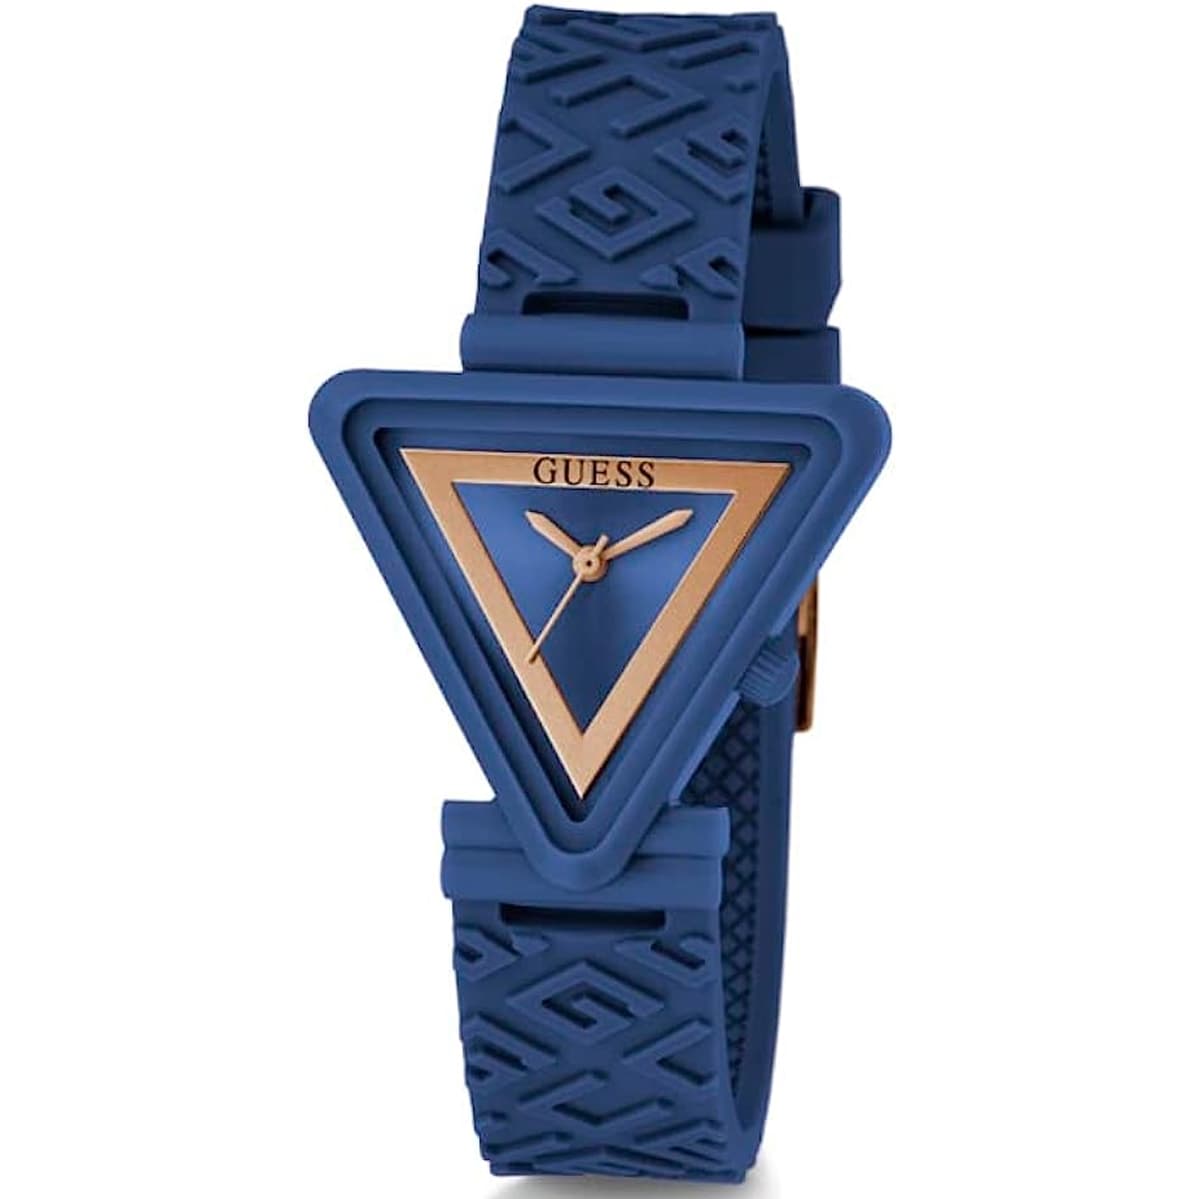 MONTRE GUESS FAME FEMME SILICONE